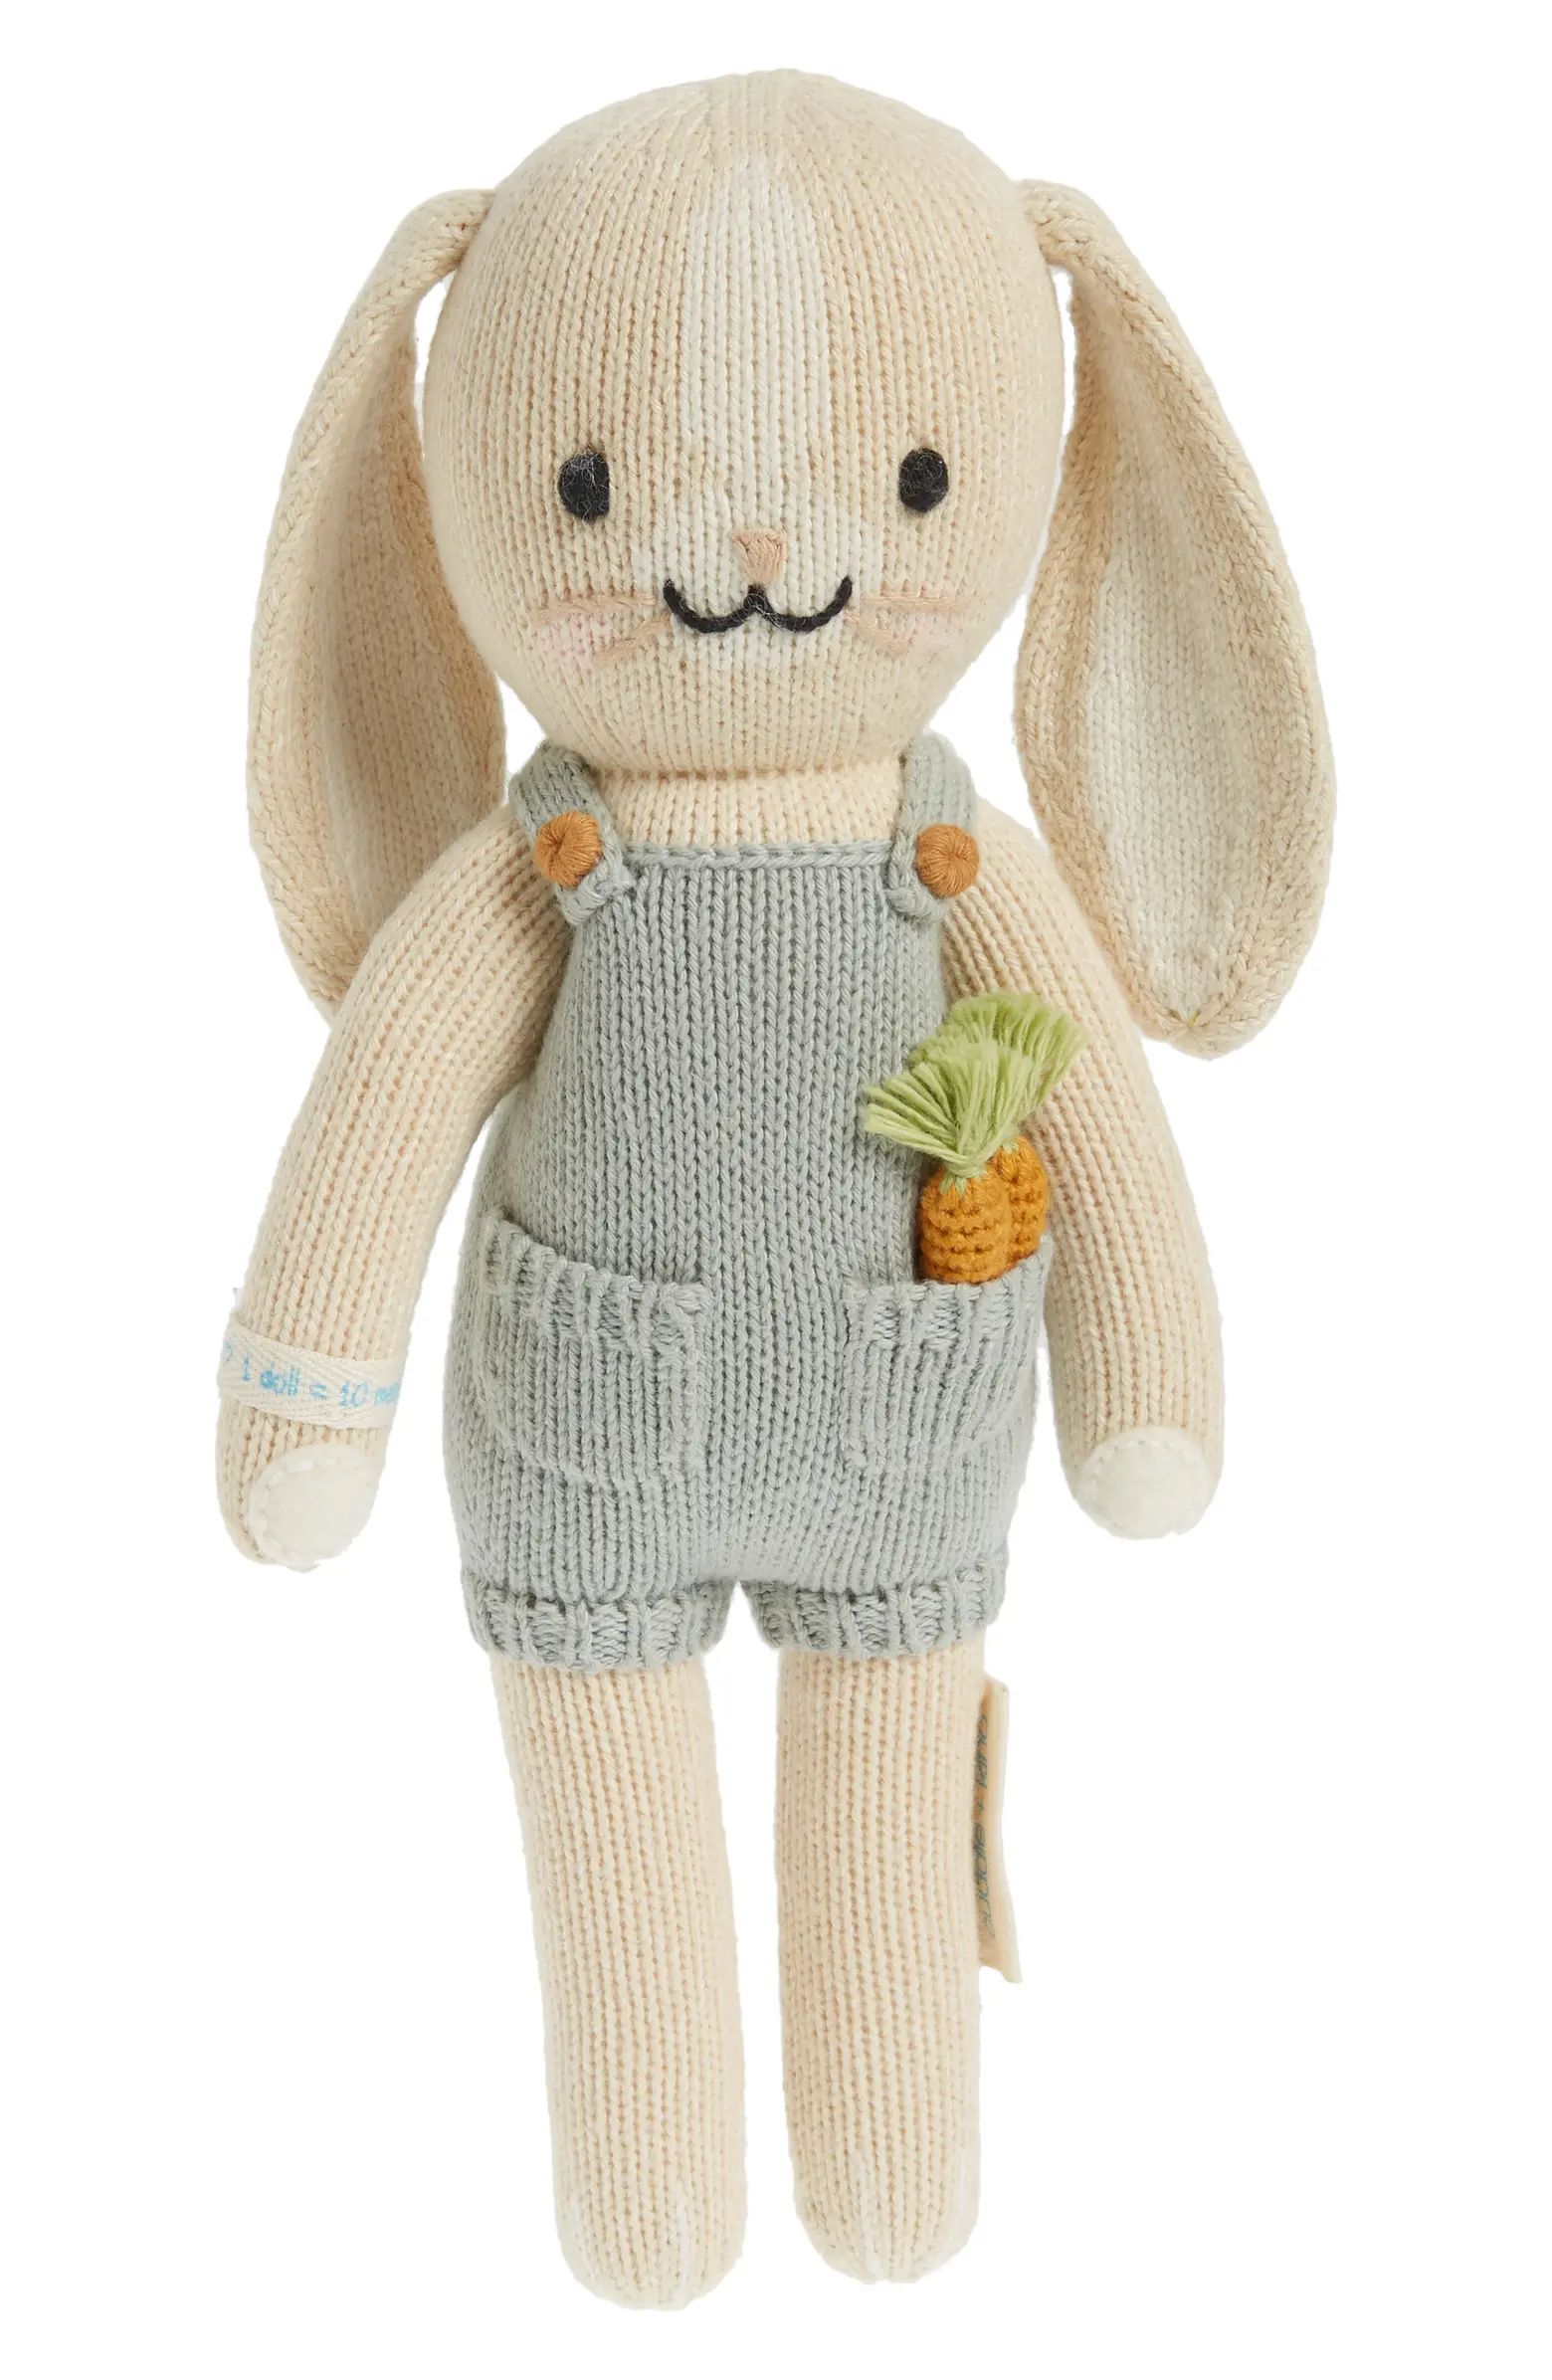 cuddle+kind Mini Henry the Bunny Stuffed Animal | Nordstrom | Nordstrom